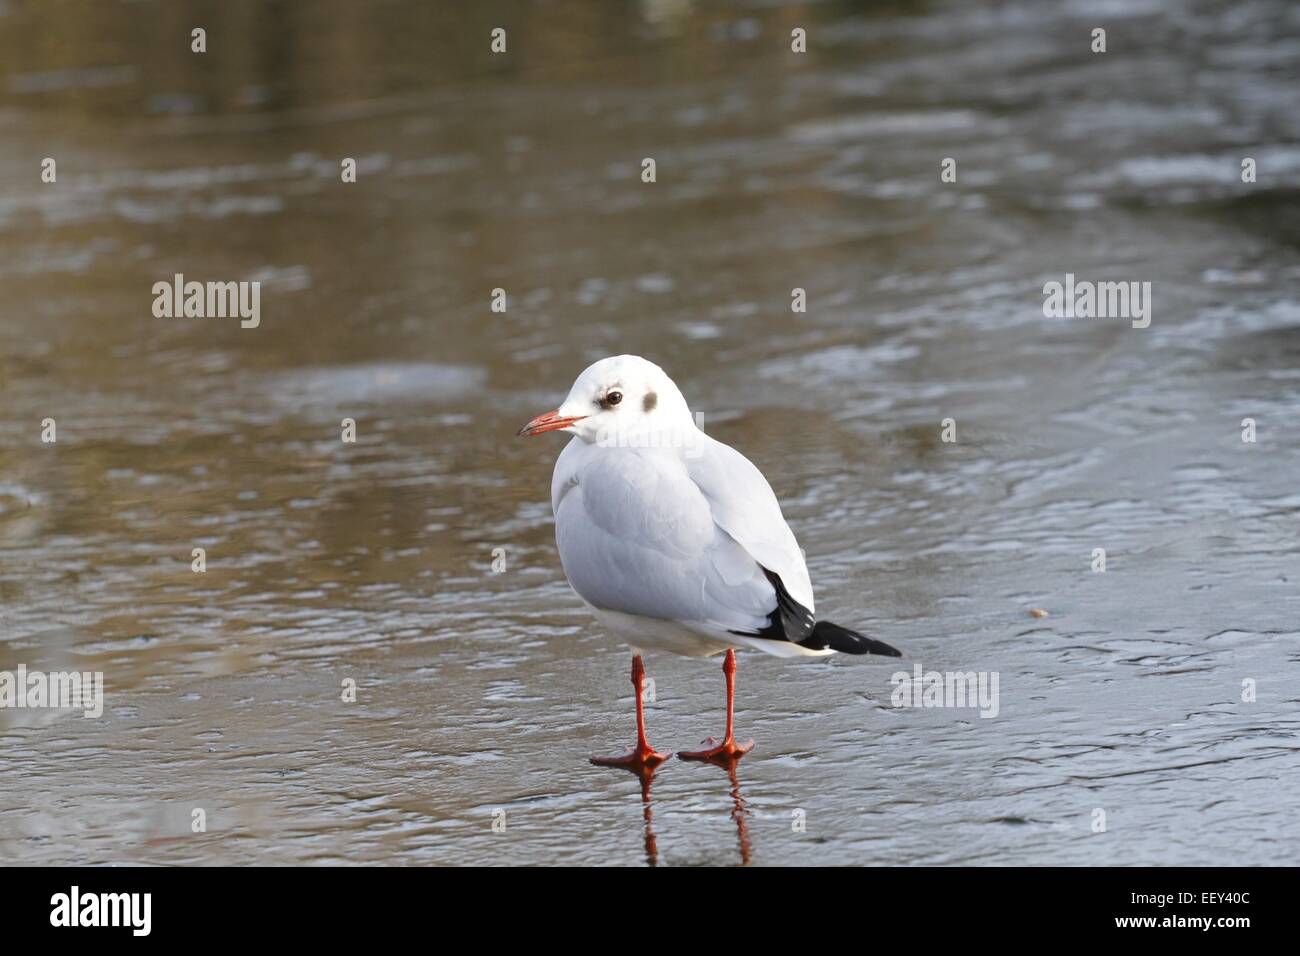 London, UK. 23rd January, 2015. With the continued cold weather, the lake at St.James park, London has partially frozen over.  A black headed gull sits on the ice. Credit:  Ed Brown/Alamy Live News Stock Photo